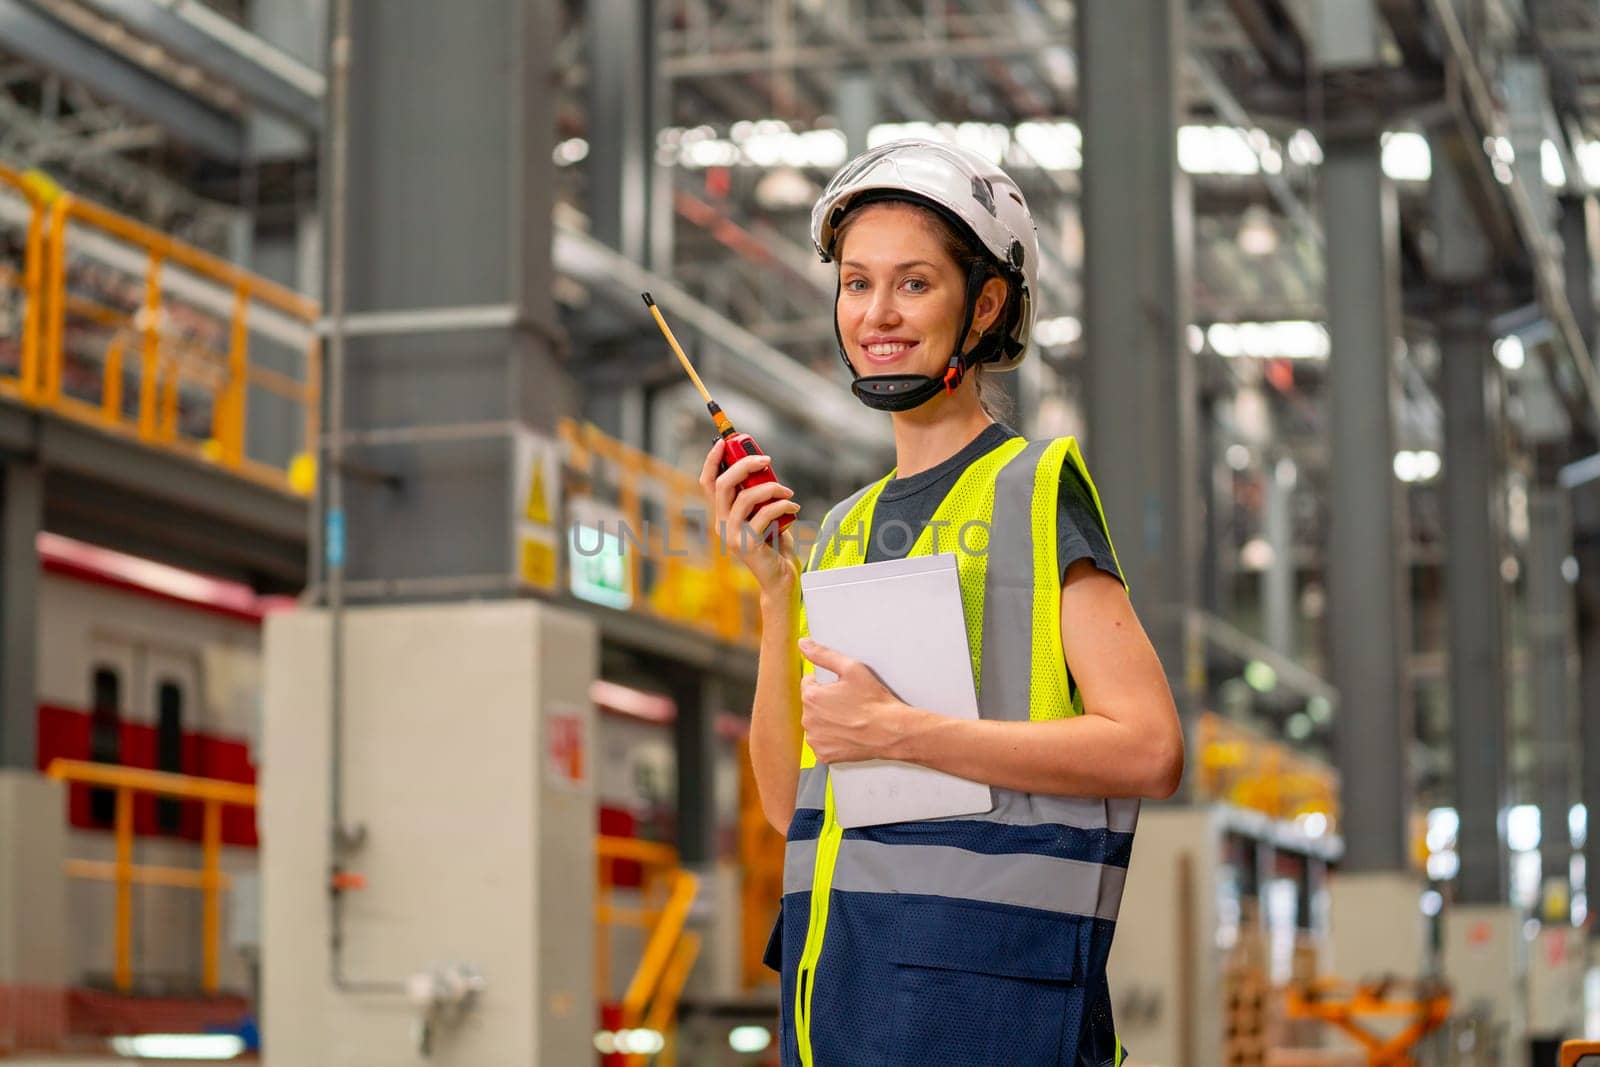 Portrait of professional engineer or technician worker woman hold tablet and walkie talkie also look at camera with smiling and stay in factory industry workplace area. by nrradmin